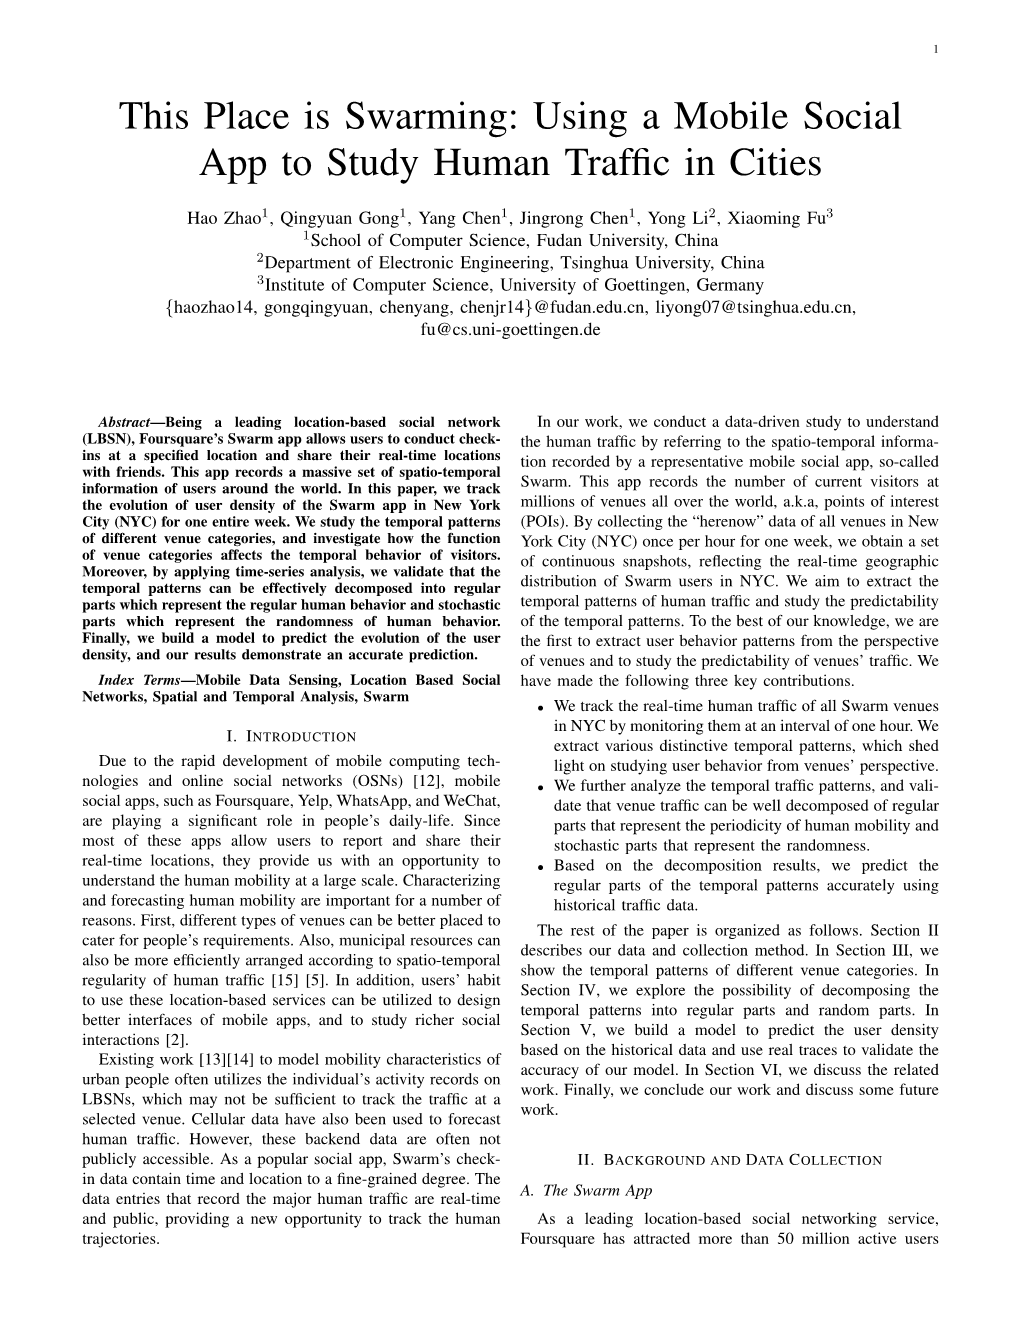 This Place Is Swarming: Using a Mobile Social App to Study Human Trafﬁc in Cities